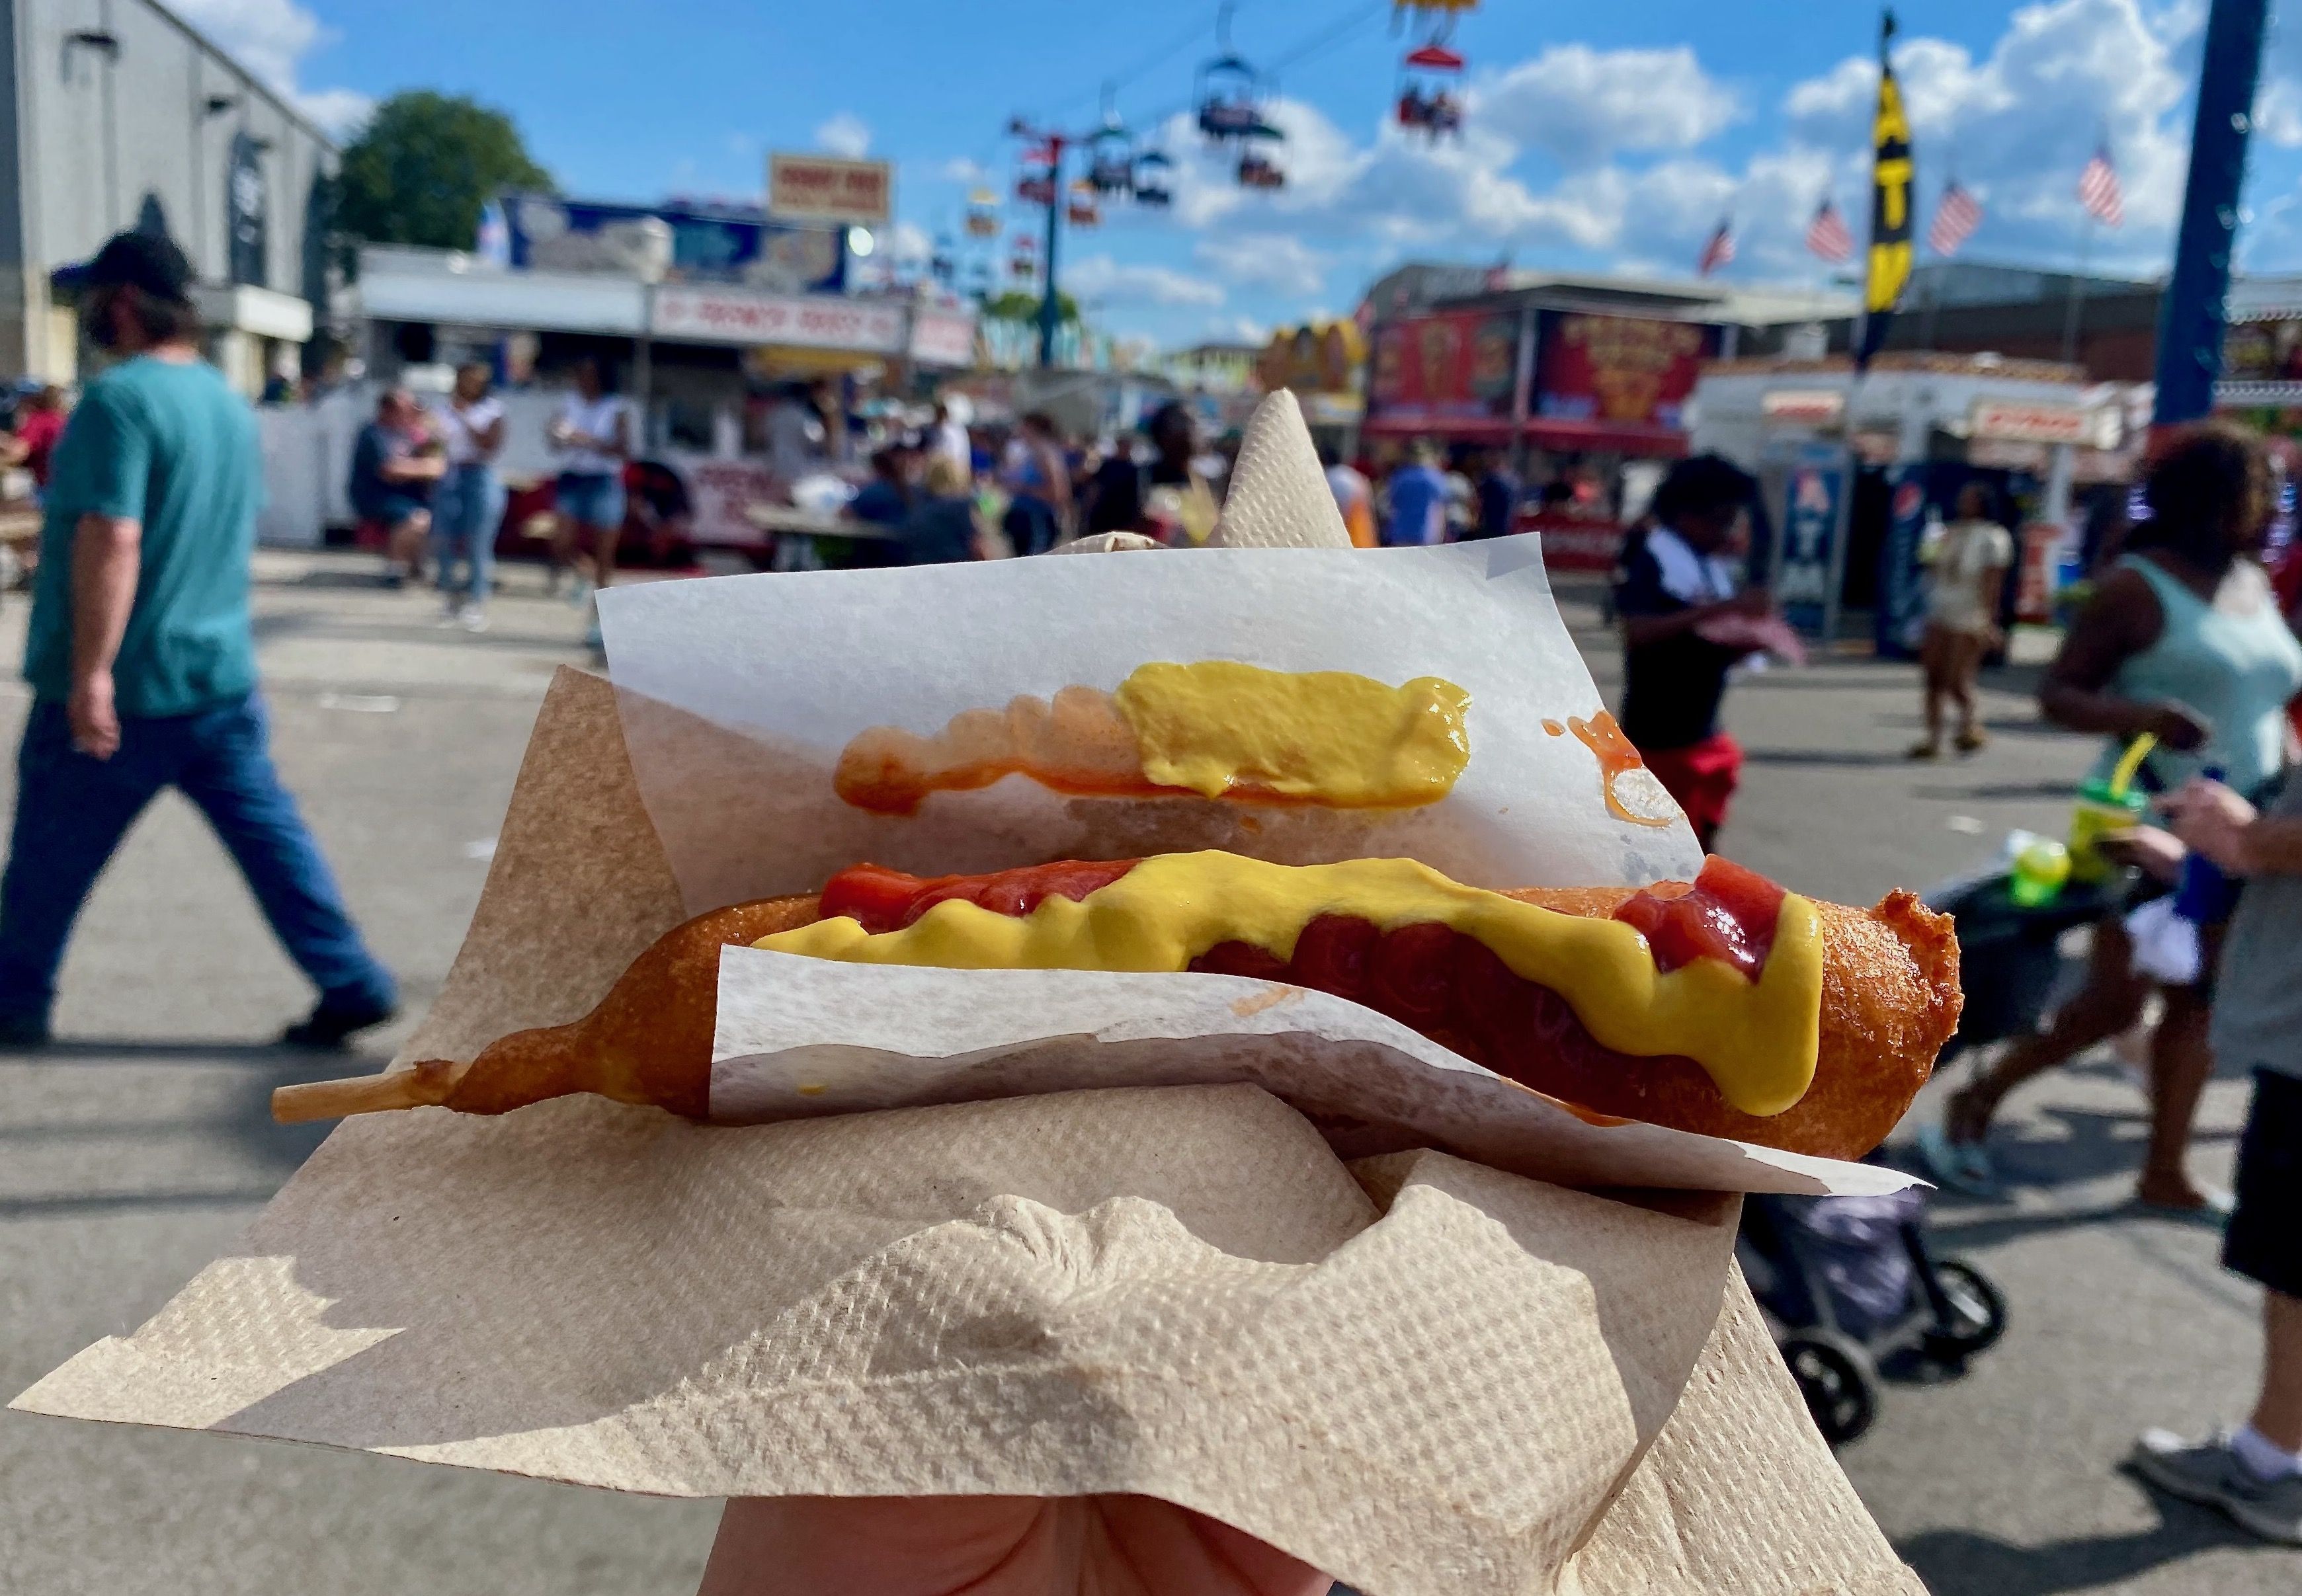 A corn dog covered in ketchup in mustard in the foreground with the SkyGlider ride in the background